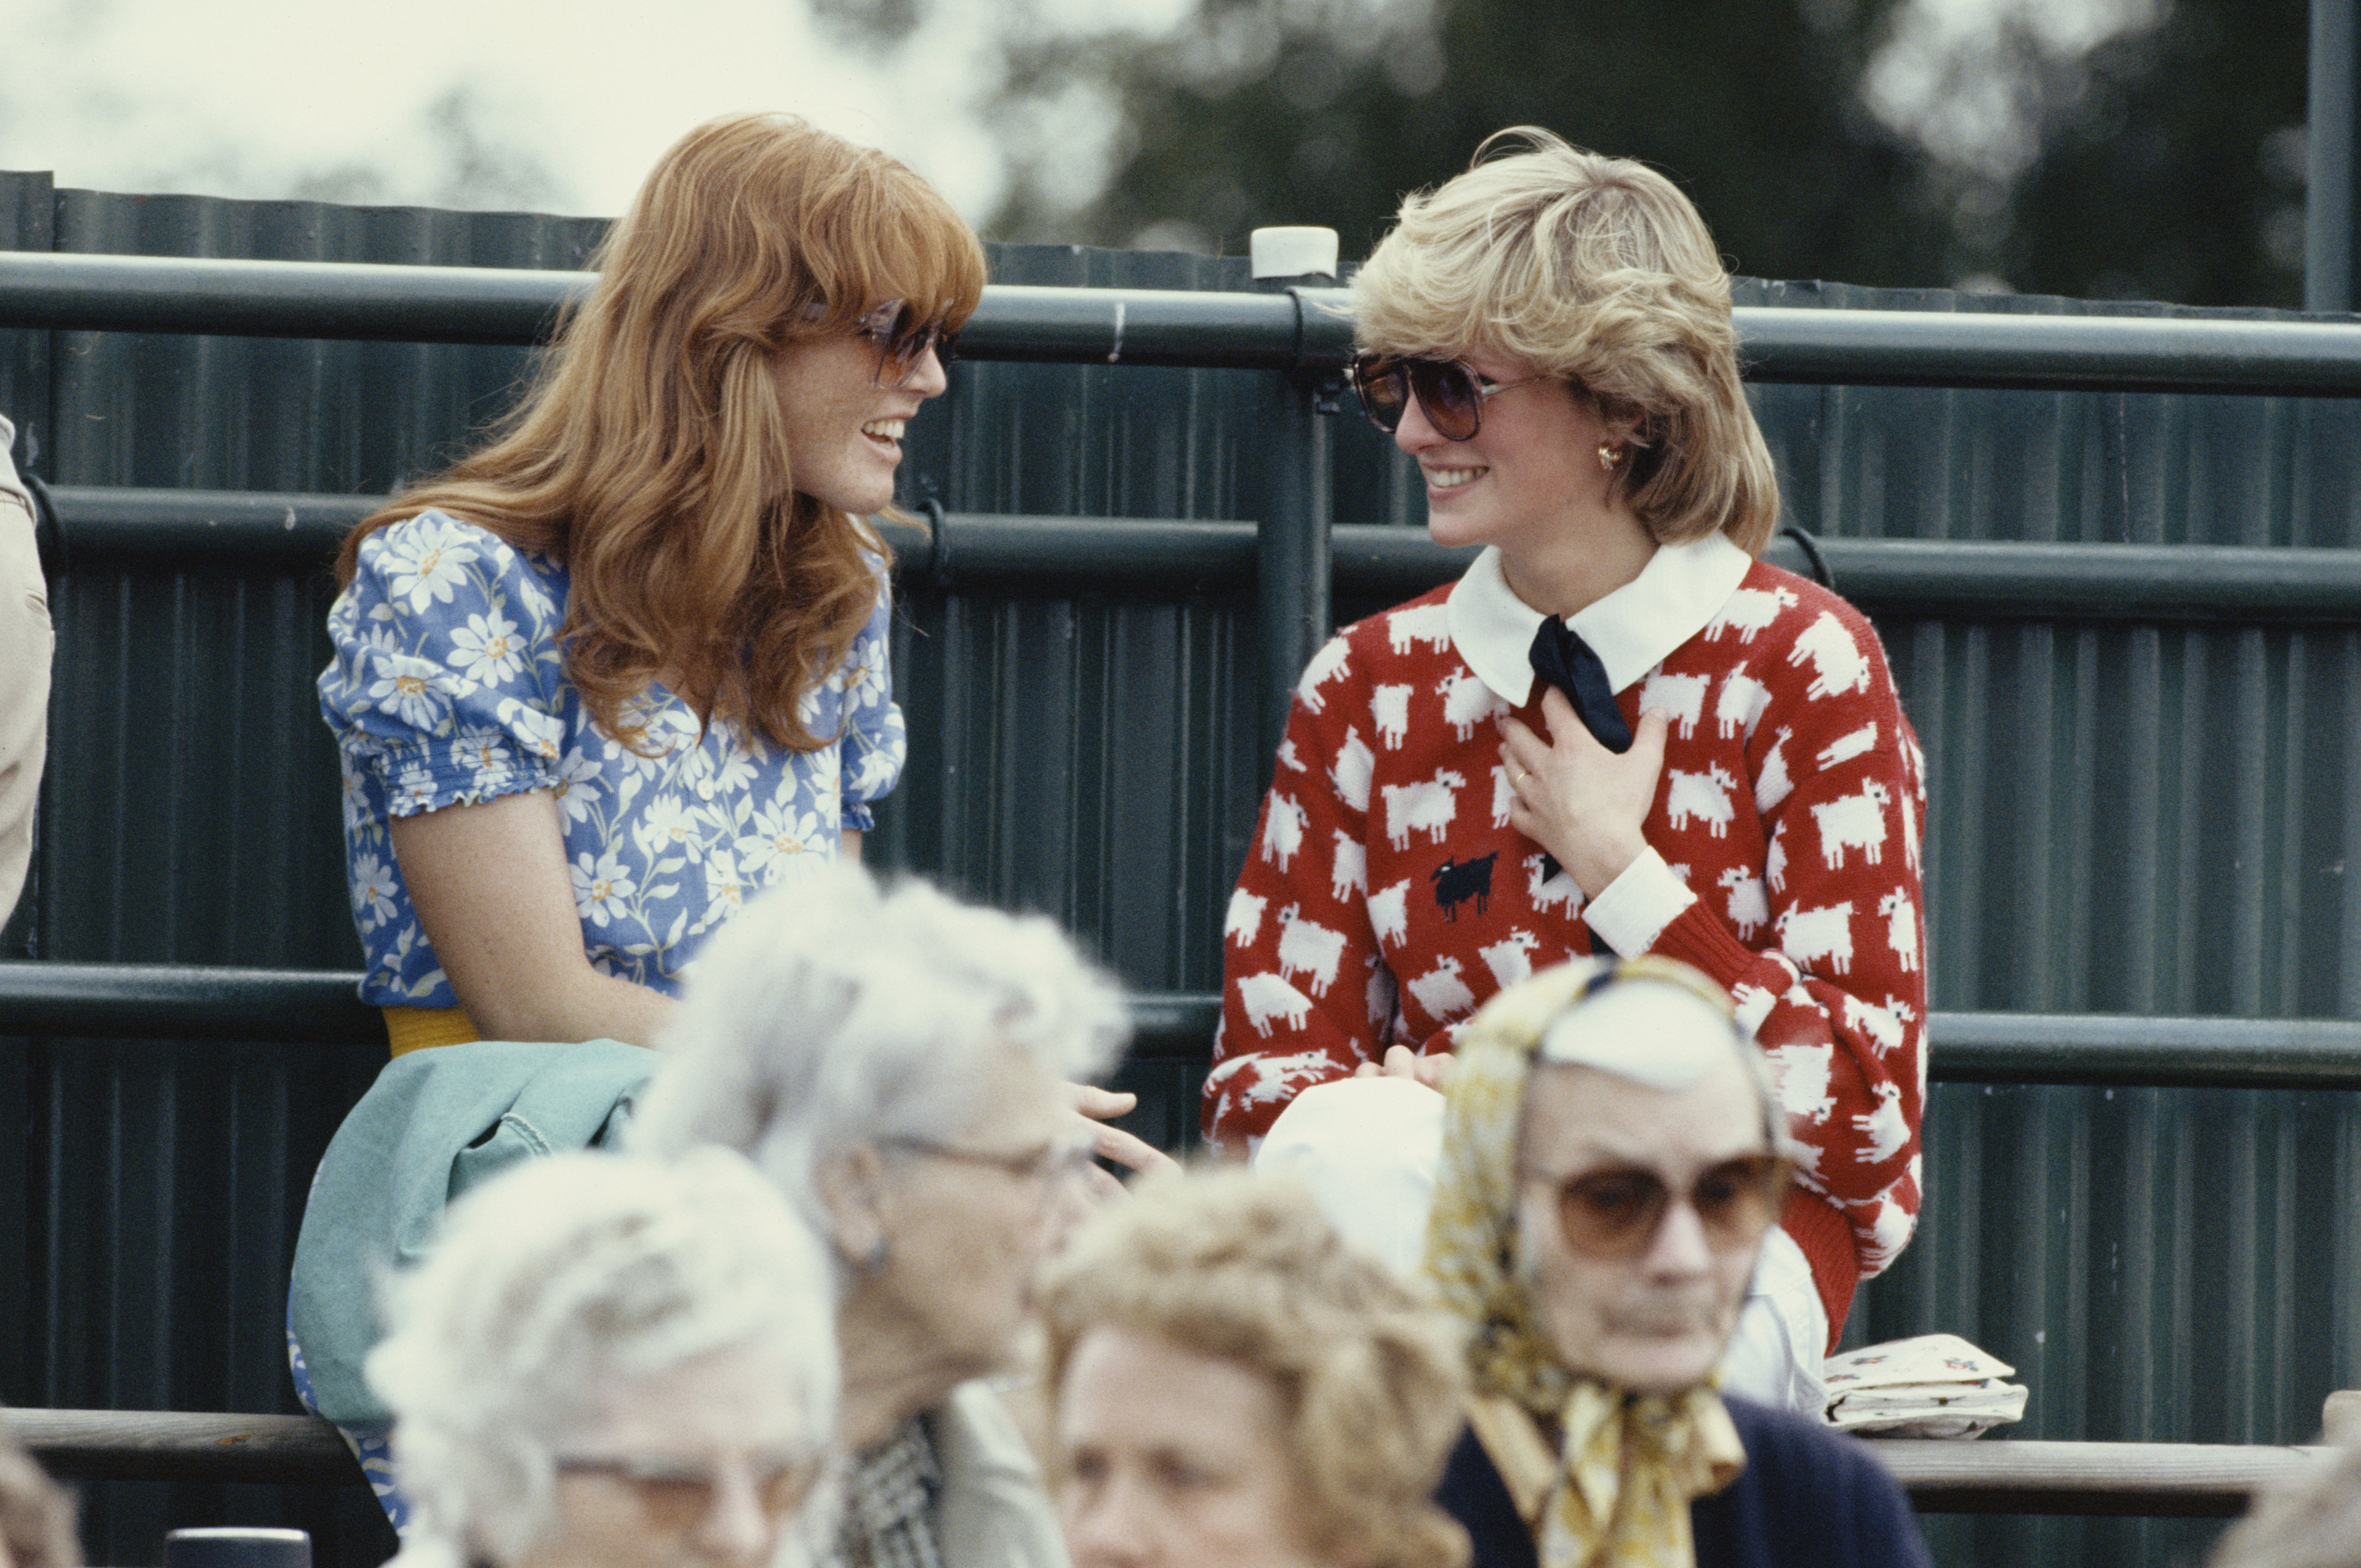 Princess Diana and Sarah Ferguson at the Guard's Polo Club in June 1983 in Windsor. | Source: Getty Images